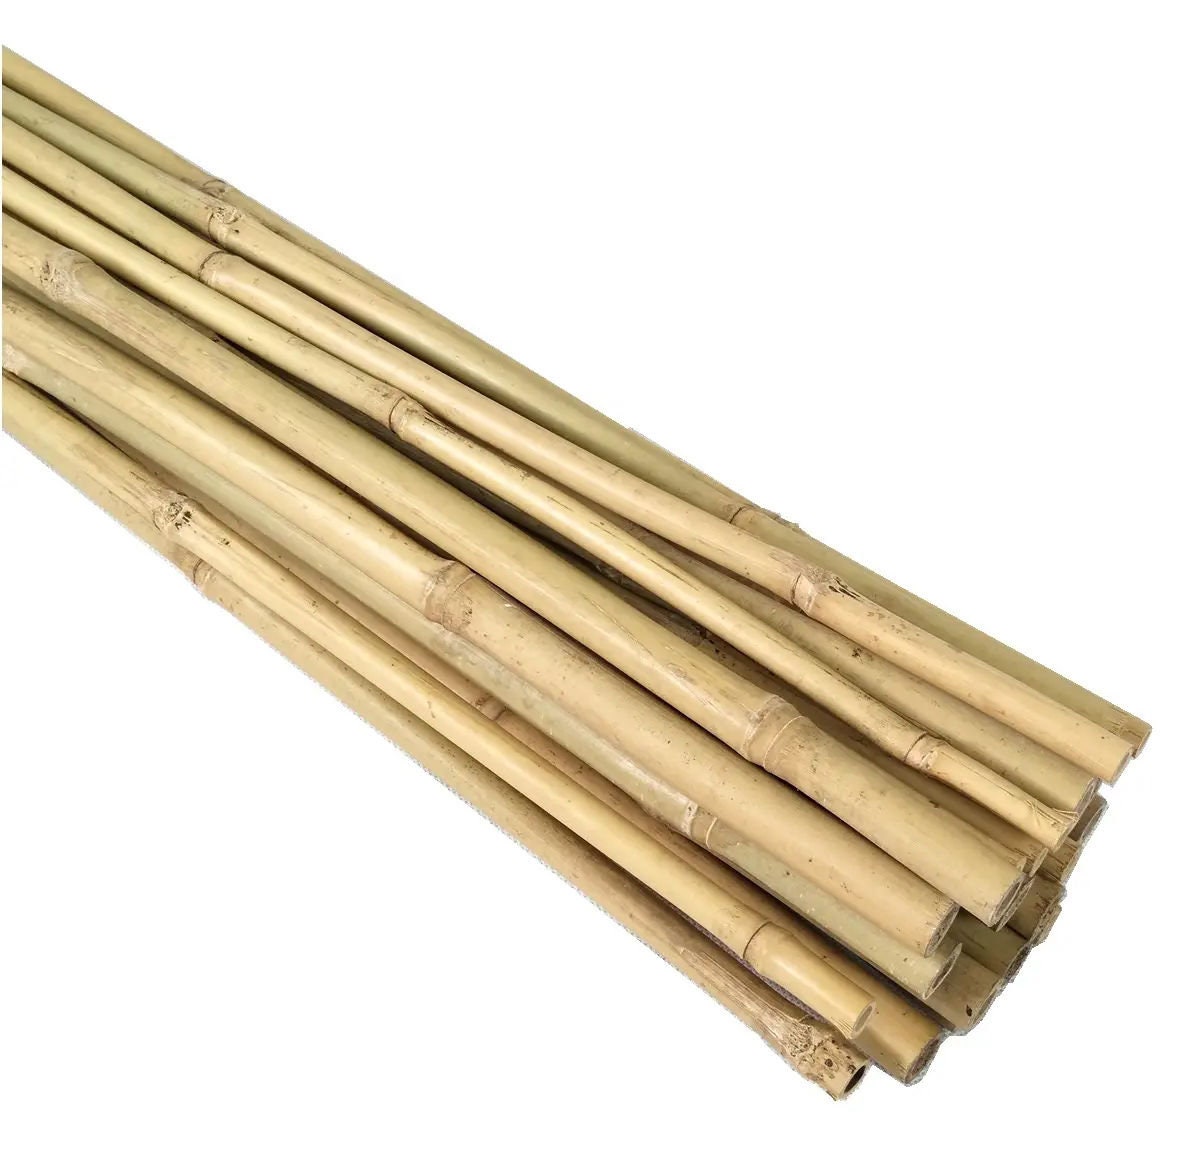 Bamboo Sticks , 12 Bamboo for Crafts,windchime Parts, Wind Chime